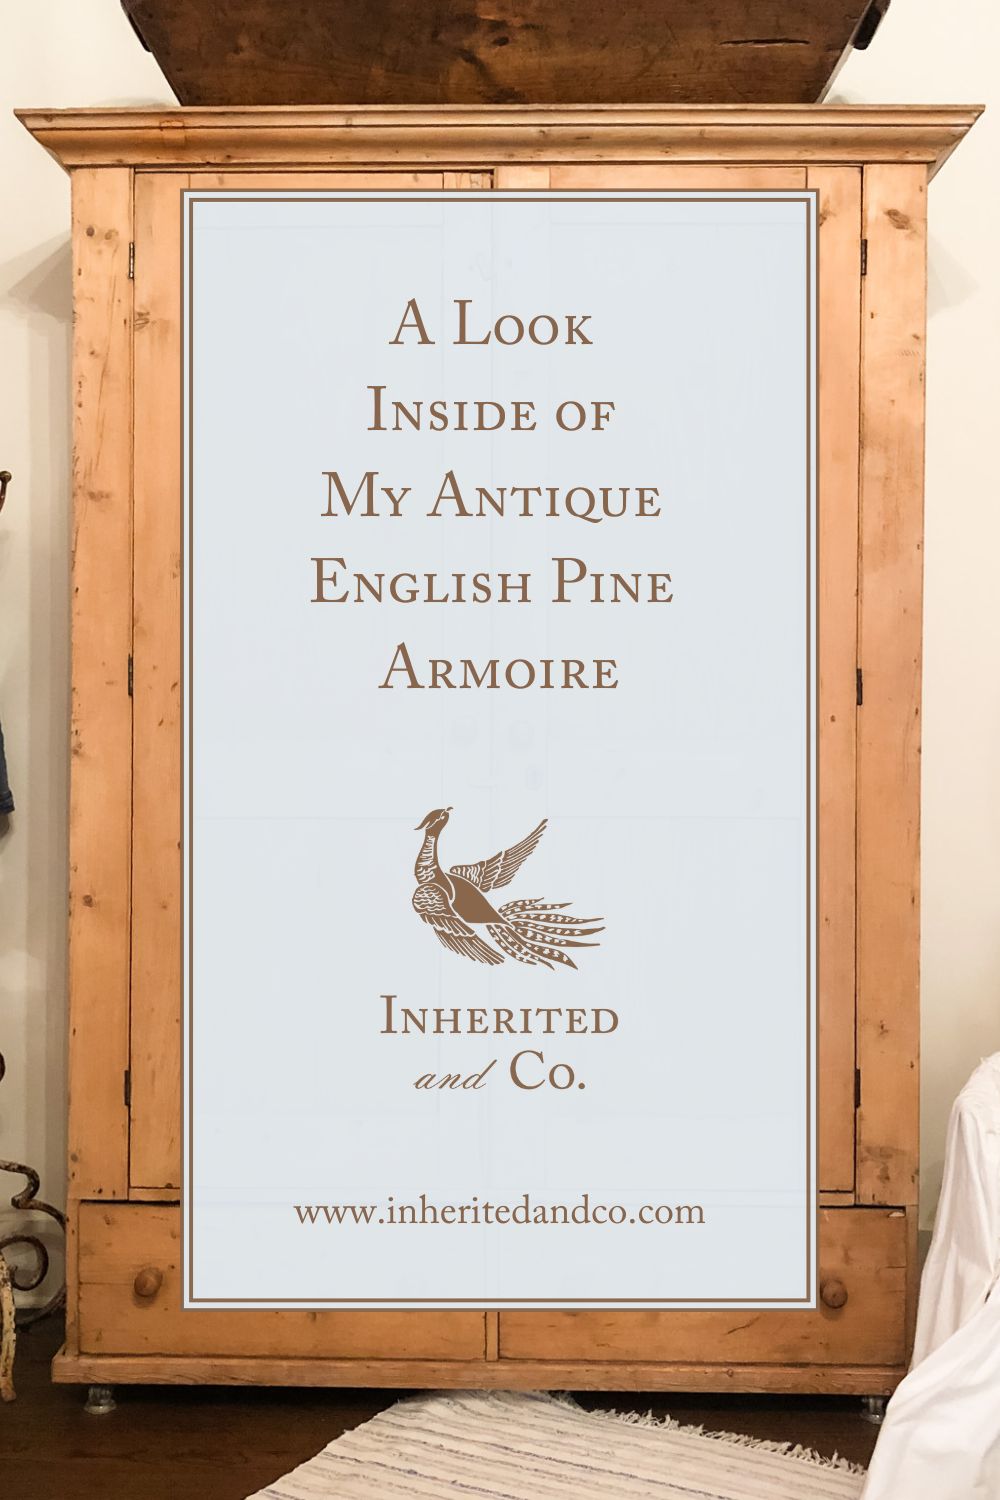 "A Look Inside of My Antique English Pine Armoire"